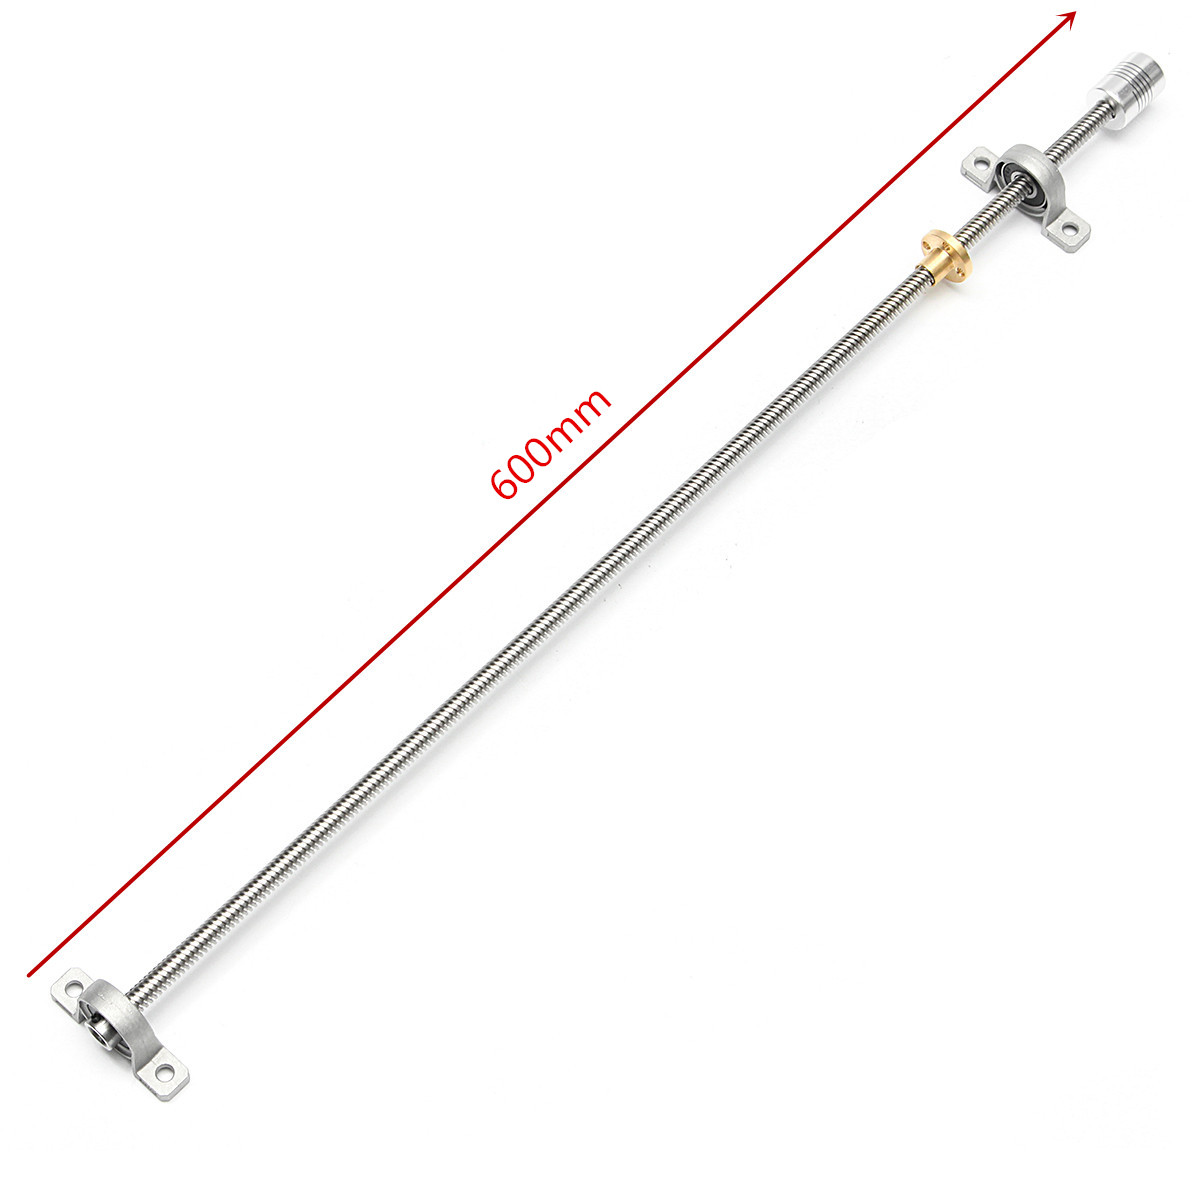 T8 600mm Stainless Steel Lead Screw Coupling Shaft Mounting + Motor For 3D Printer 10